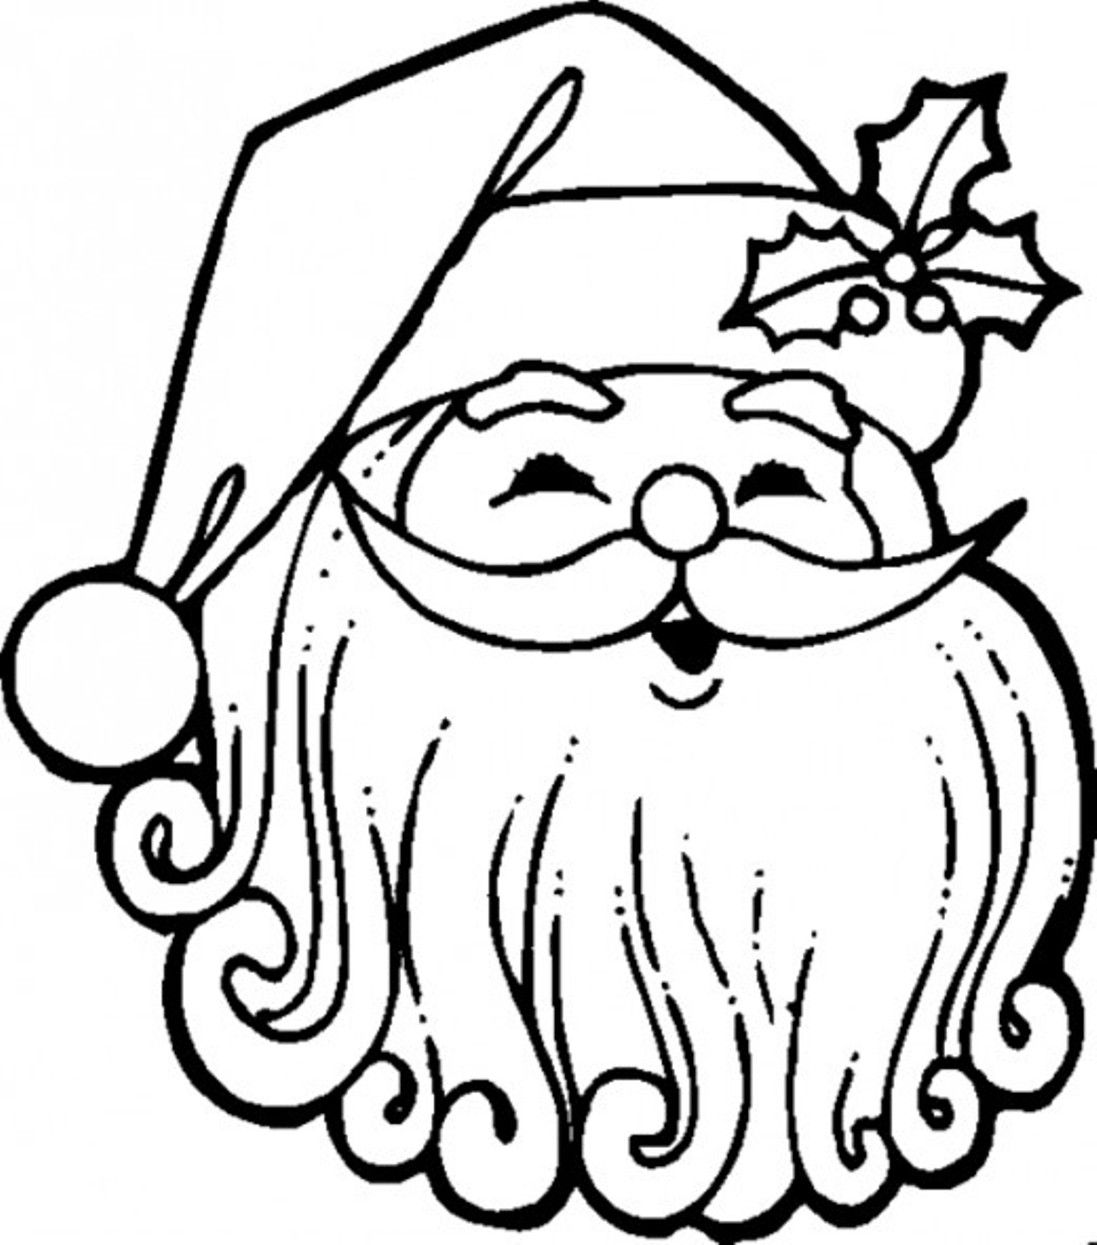 Face Of Santa Claus Coloring Pages Free | Christmas Coloring pages ...